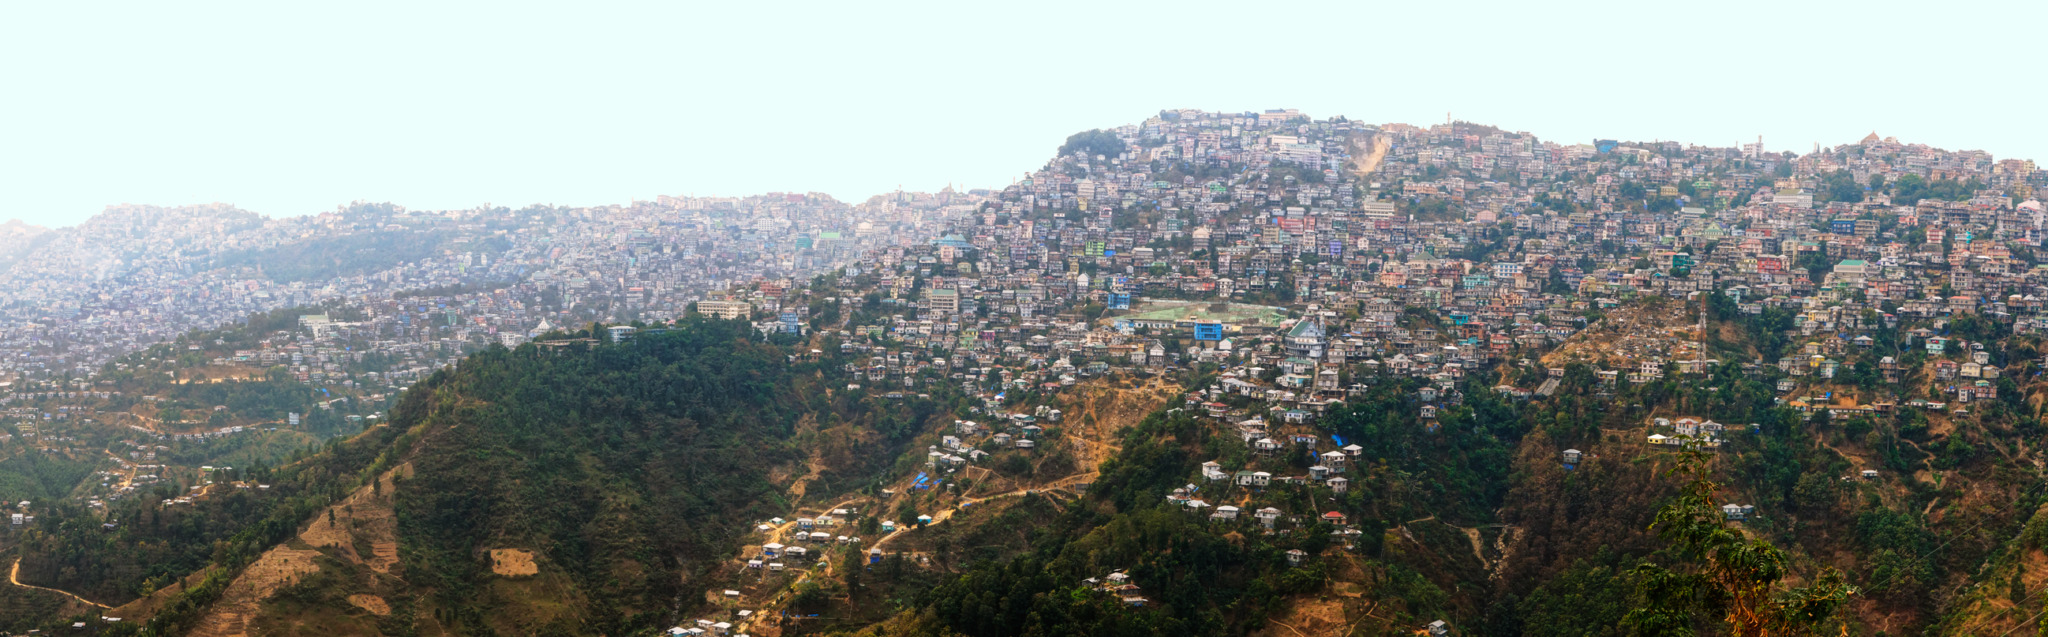 A view of Aizawl taken from Zemabawk east of the city